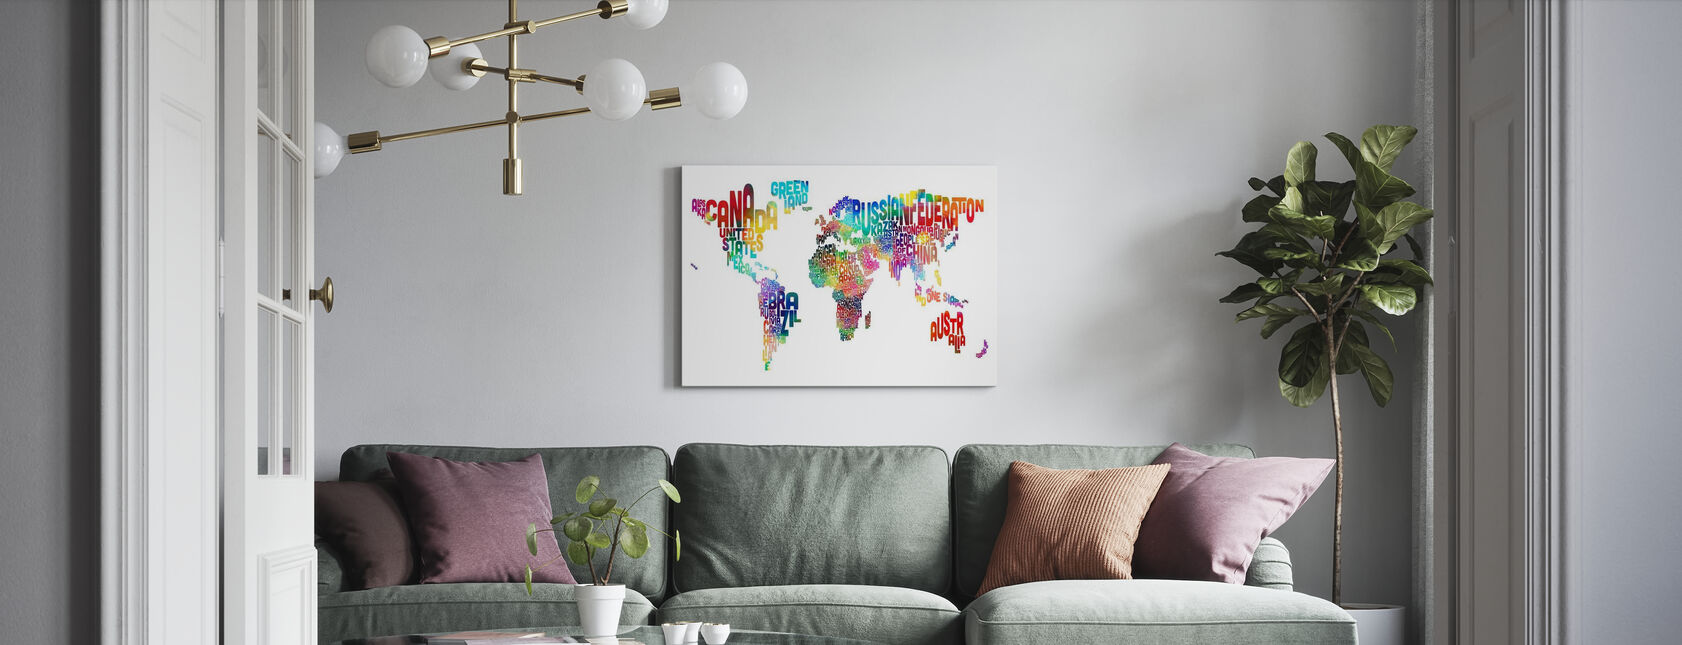 Typographic Text World Map 2 - Canvas print - Living Room